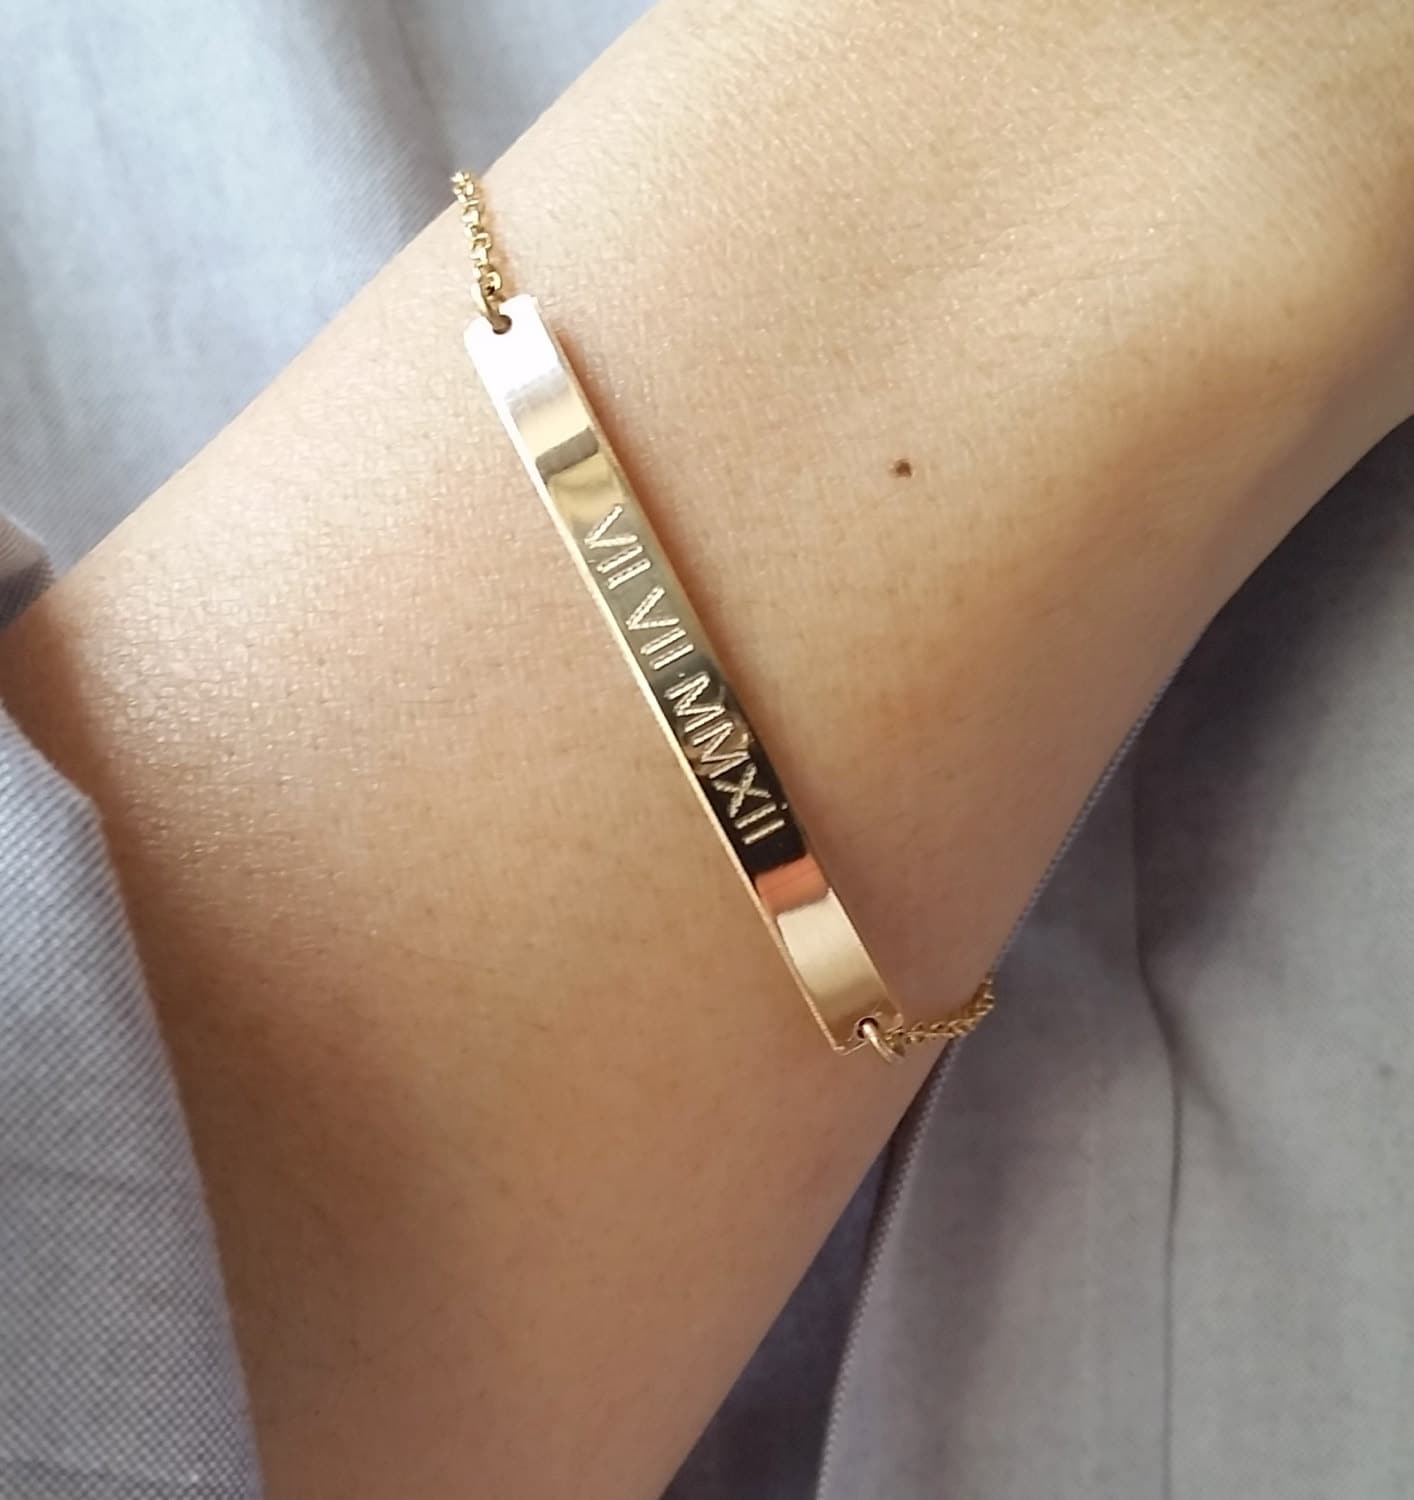 Roman Numeral Bracelet Mom and Daughter JewelryHANDMADE 24k GOLD Silver  Bangle